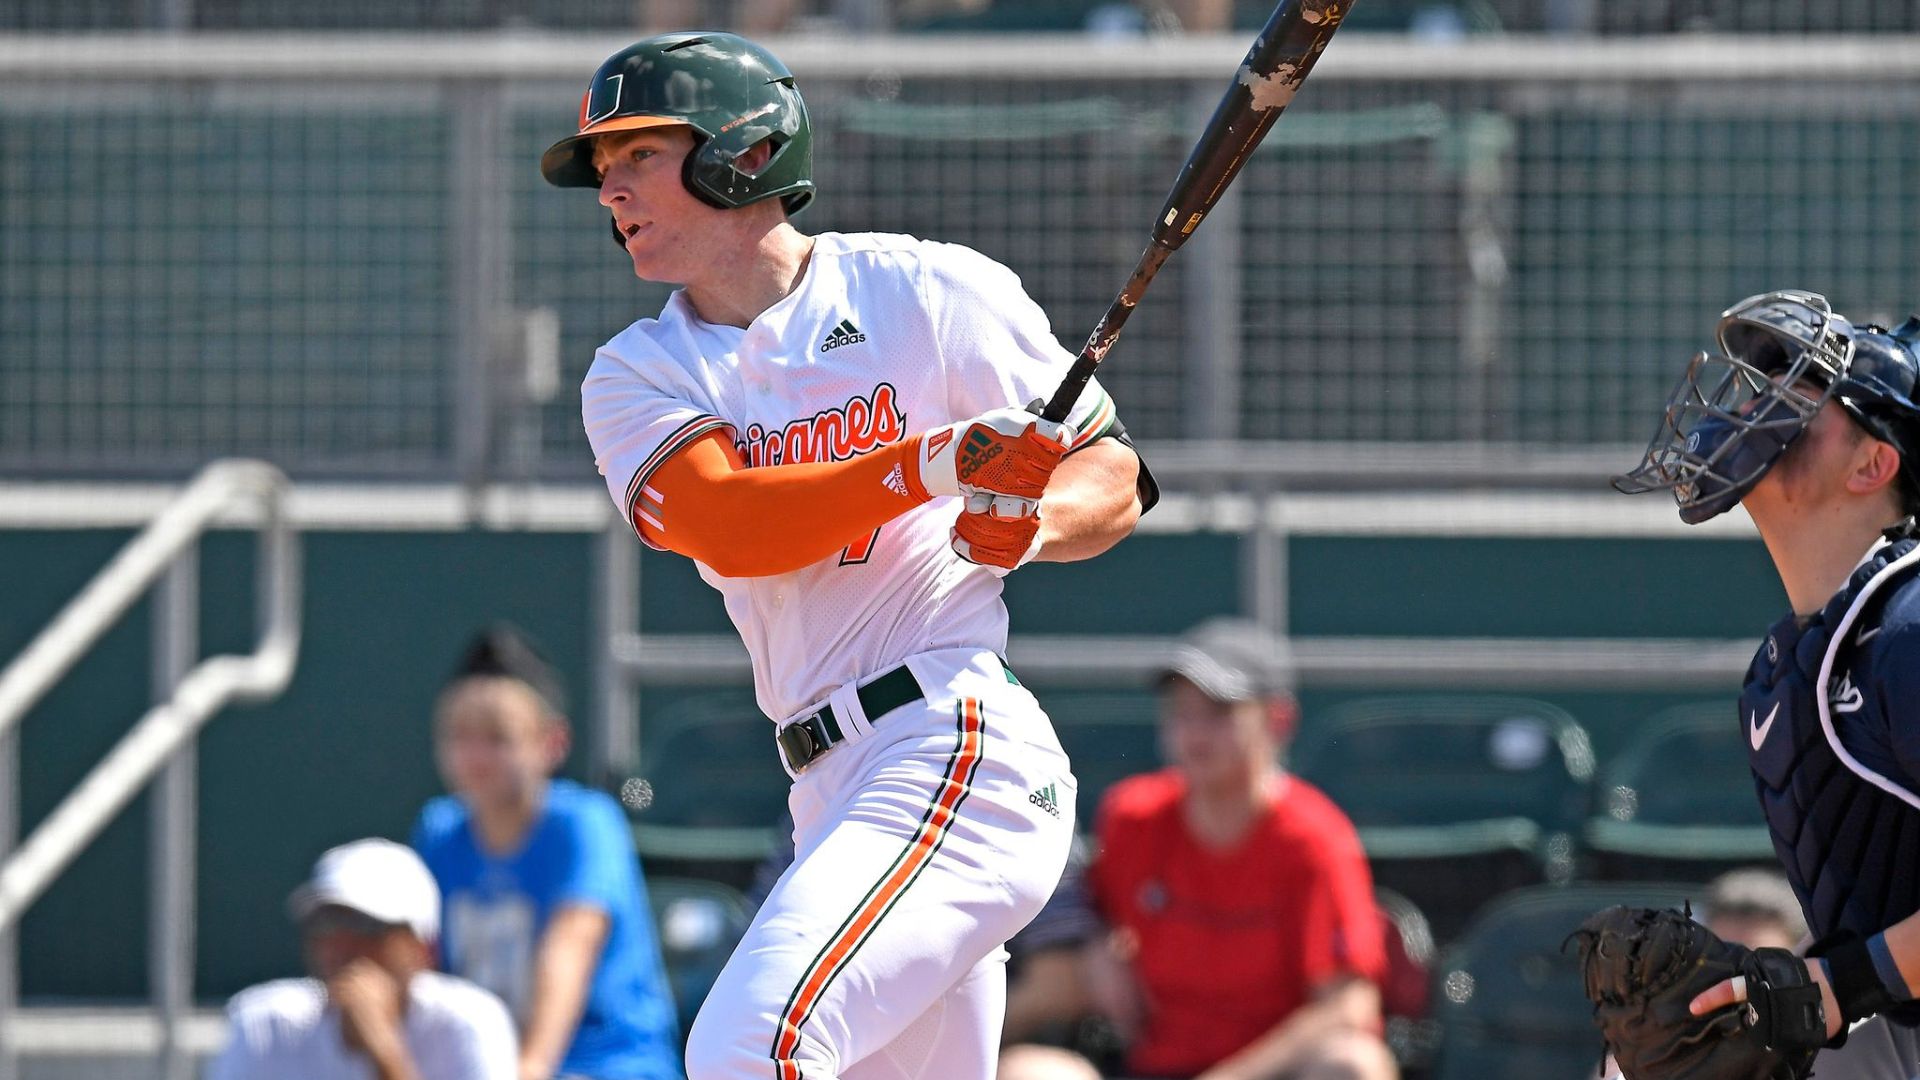 Miami outfielder Zach Levenson runs to first base in the fifth